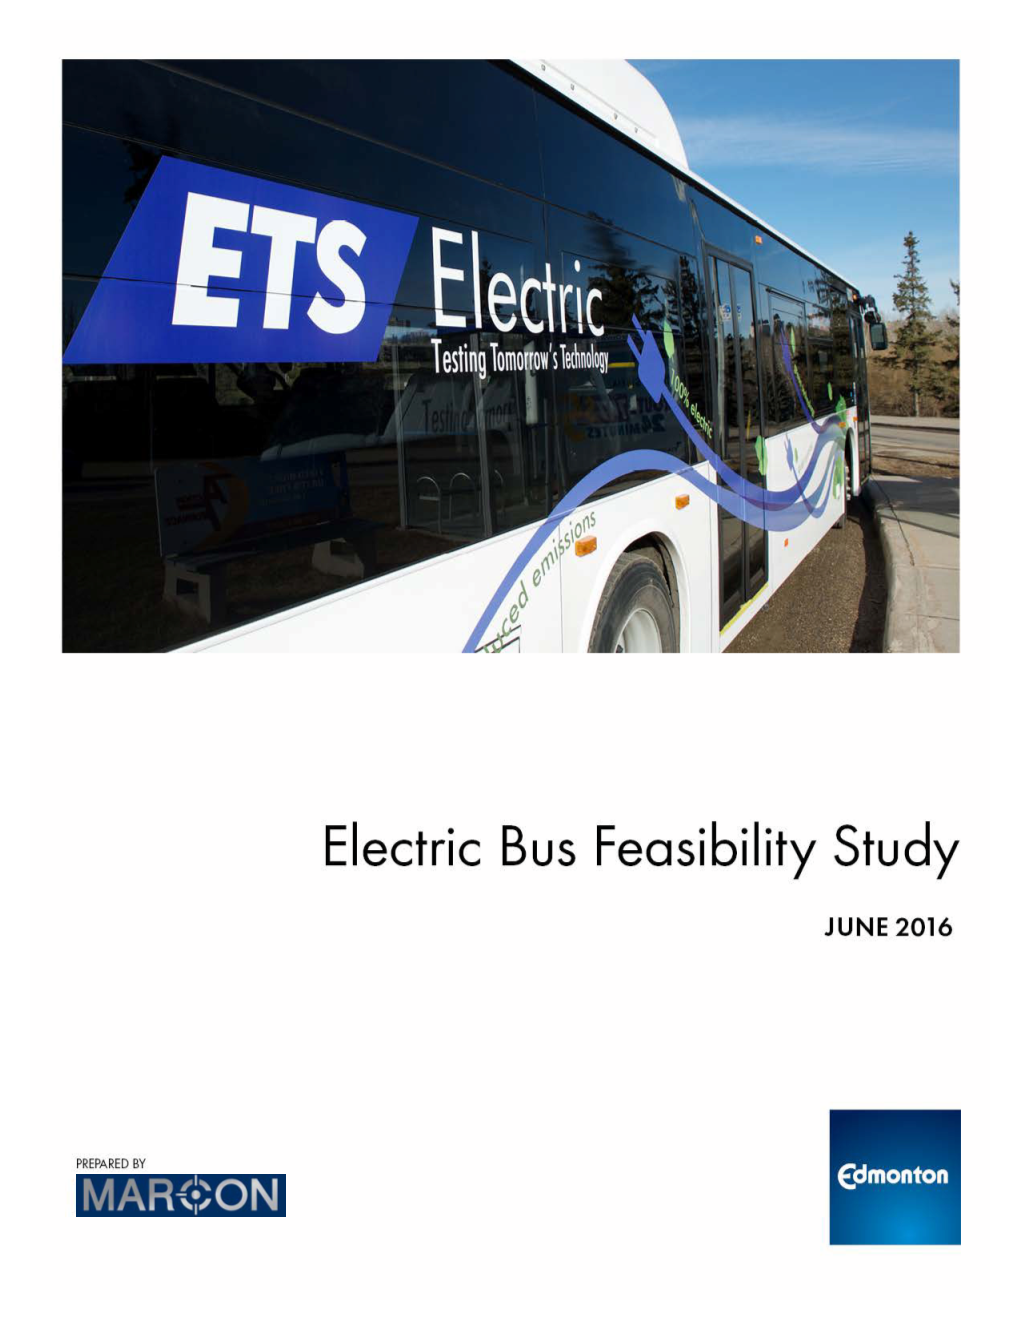 Electric Bus Feasibility Study for the City of Edmonton